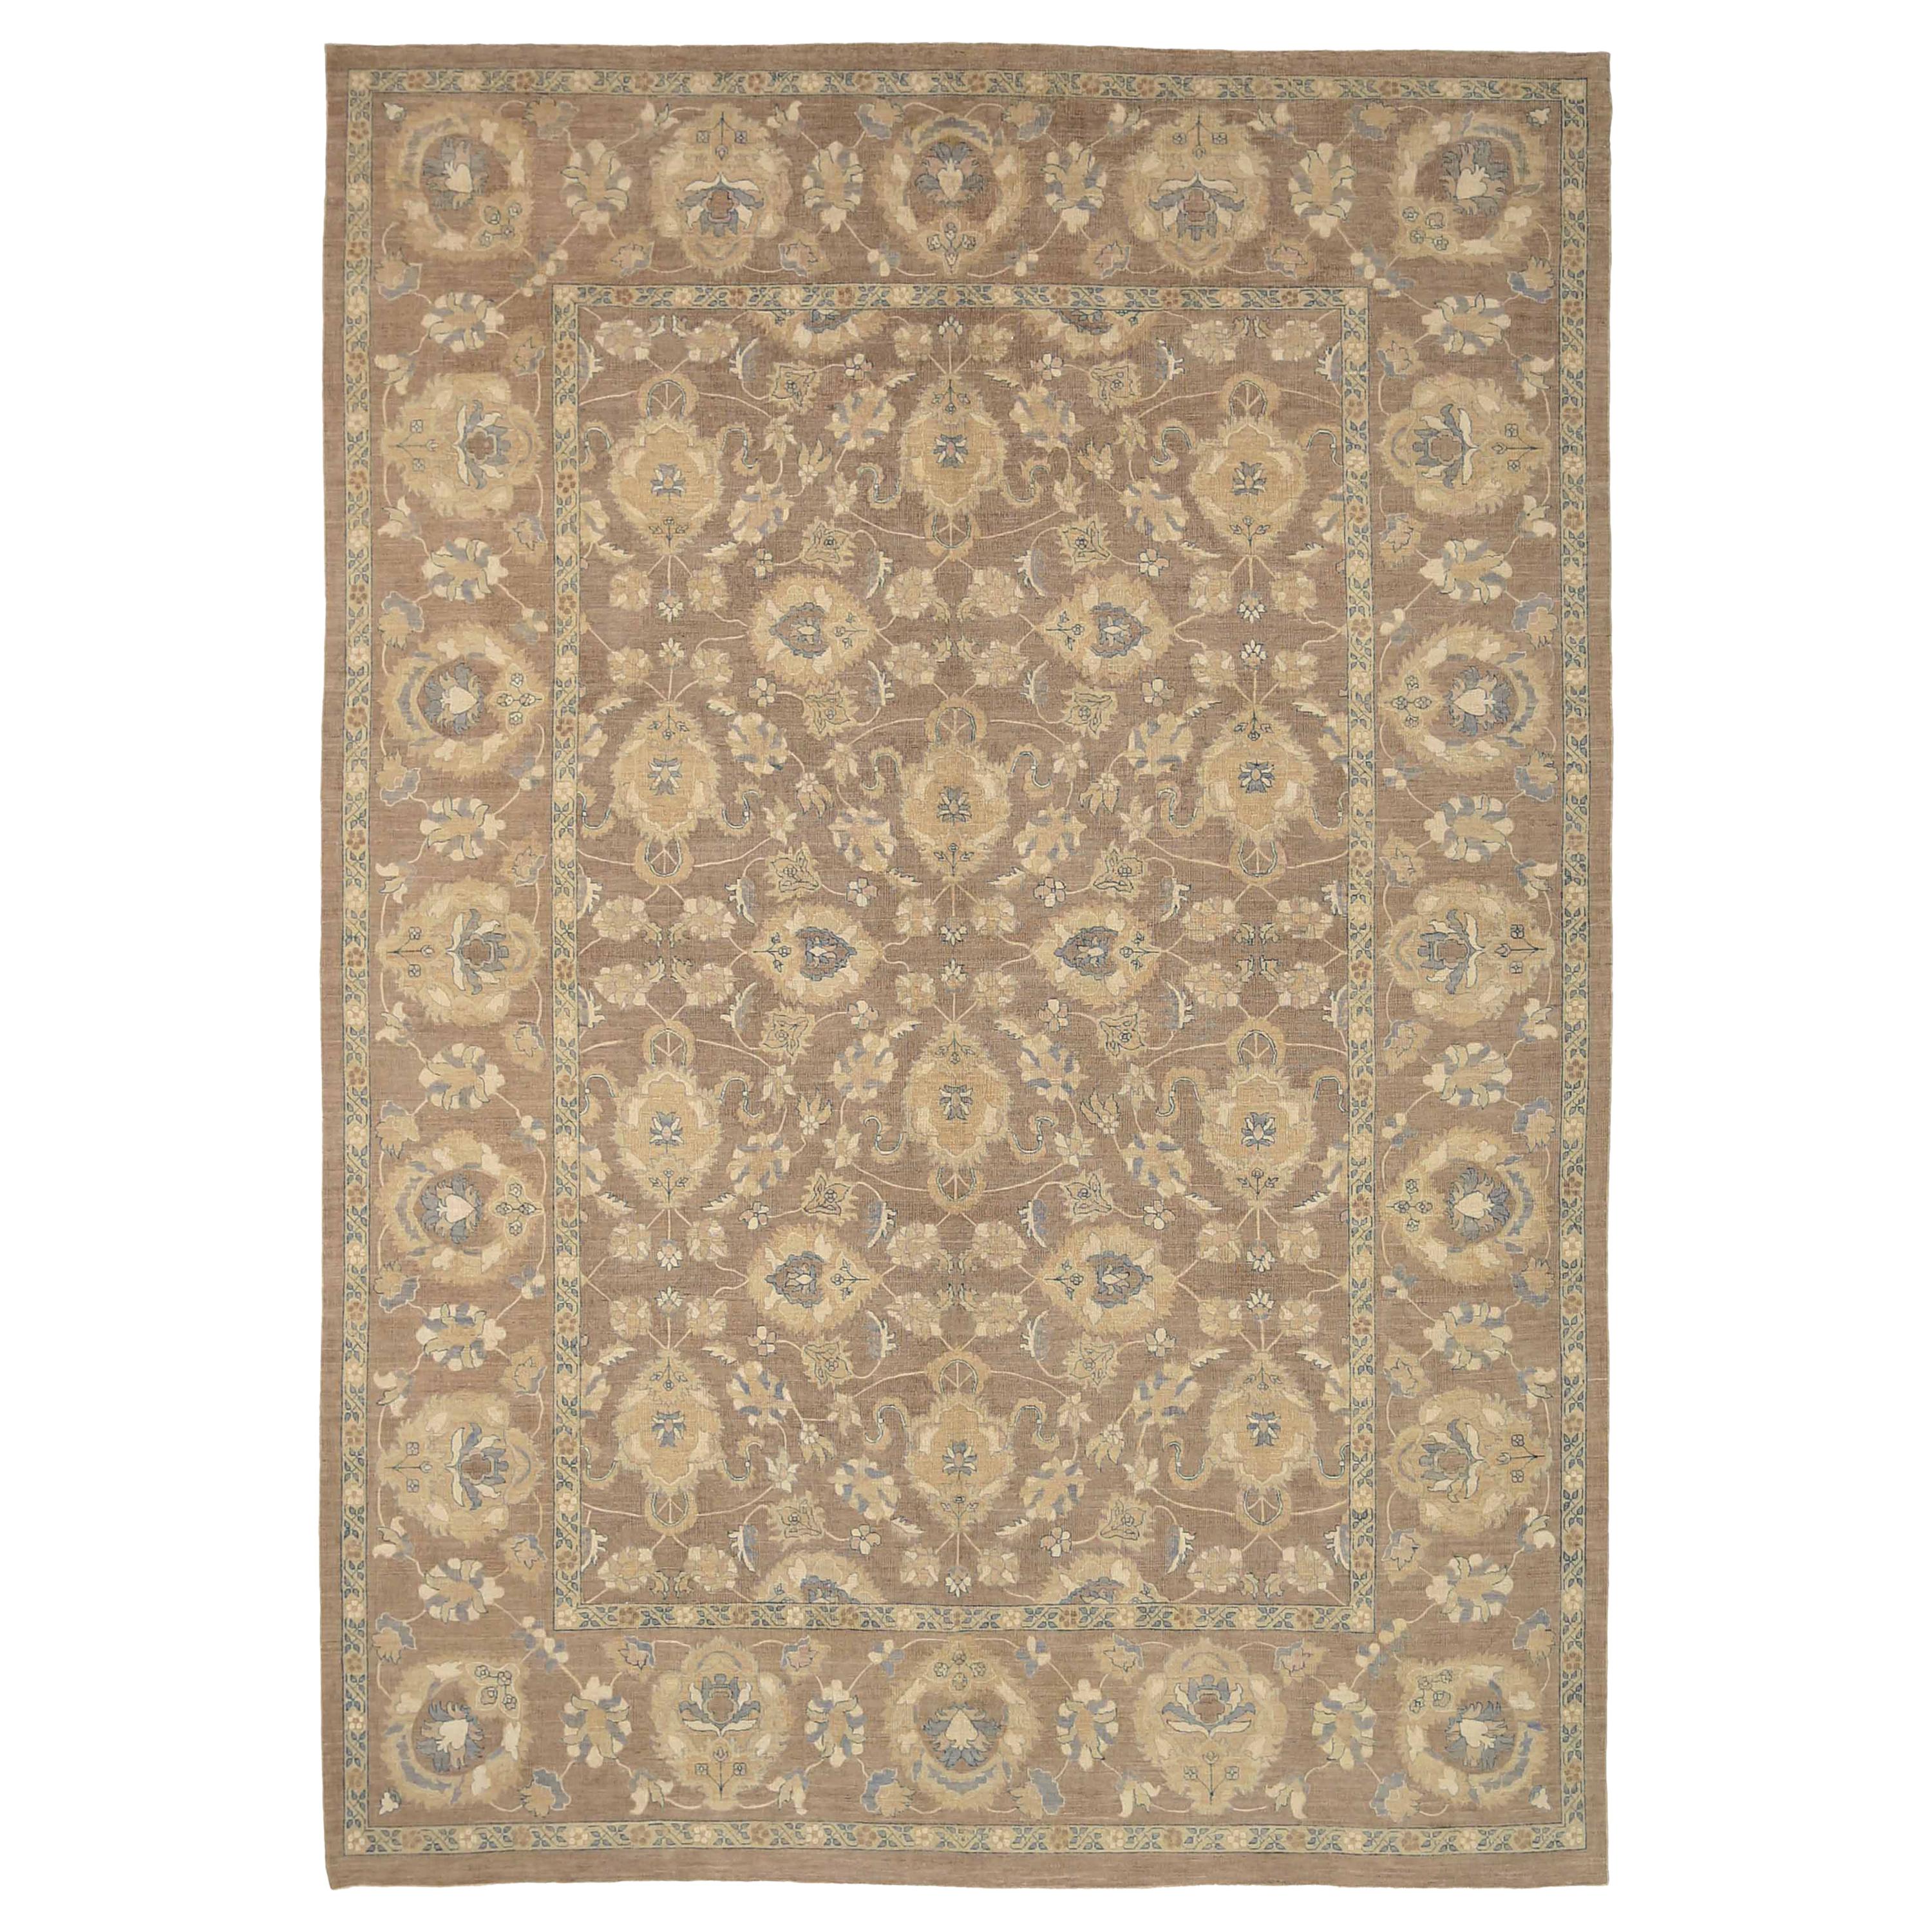 New Haji Jalili Style Afghan Area Rug with '17th-Century' Antique Look